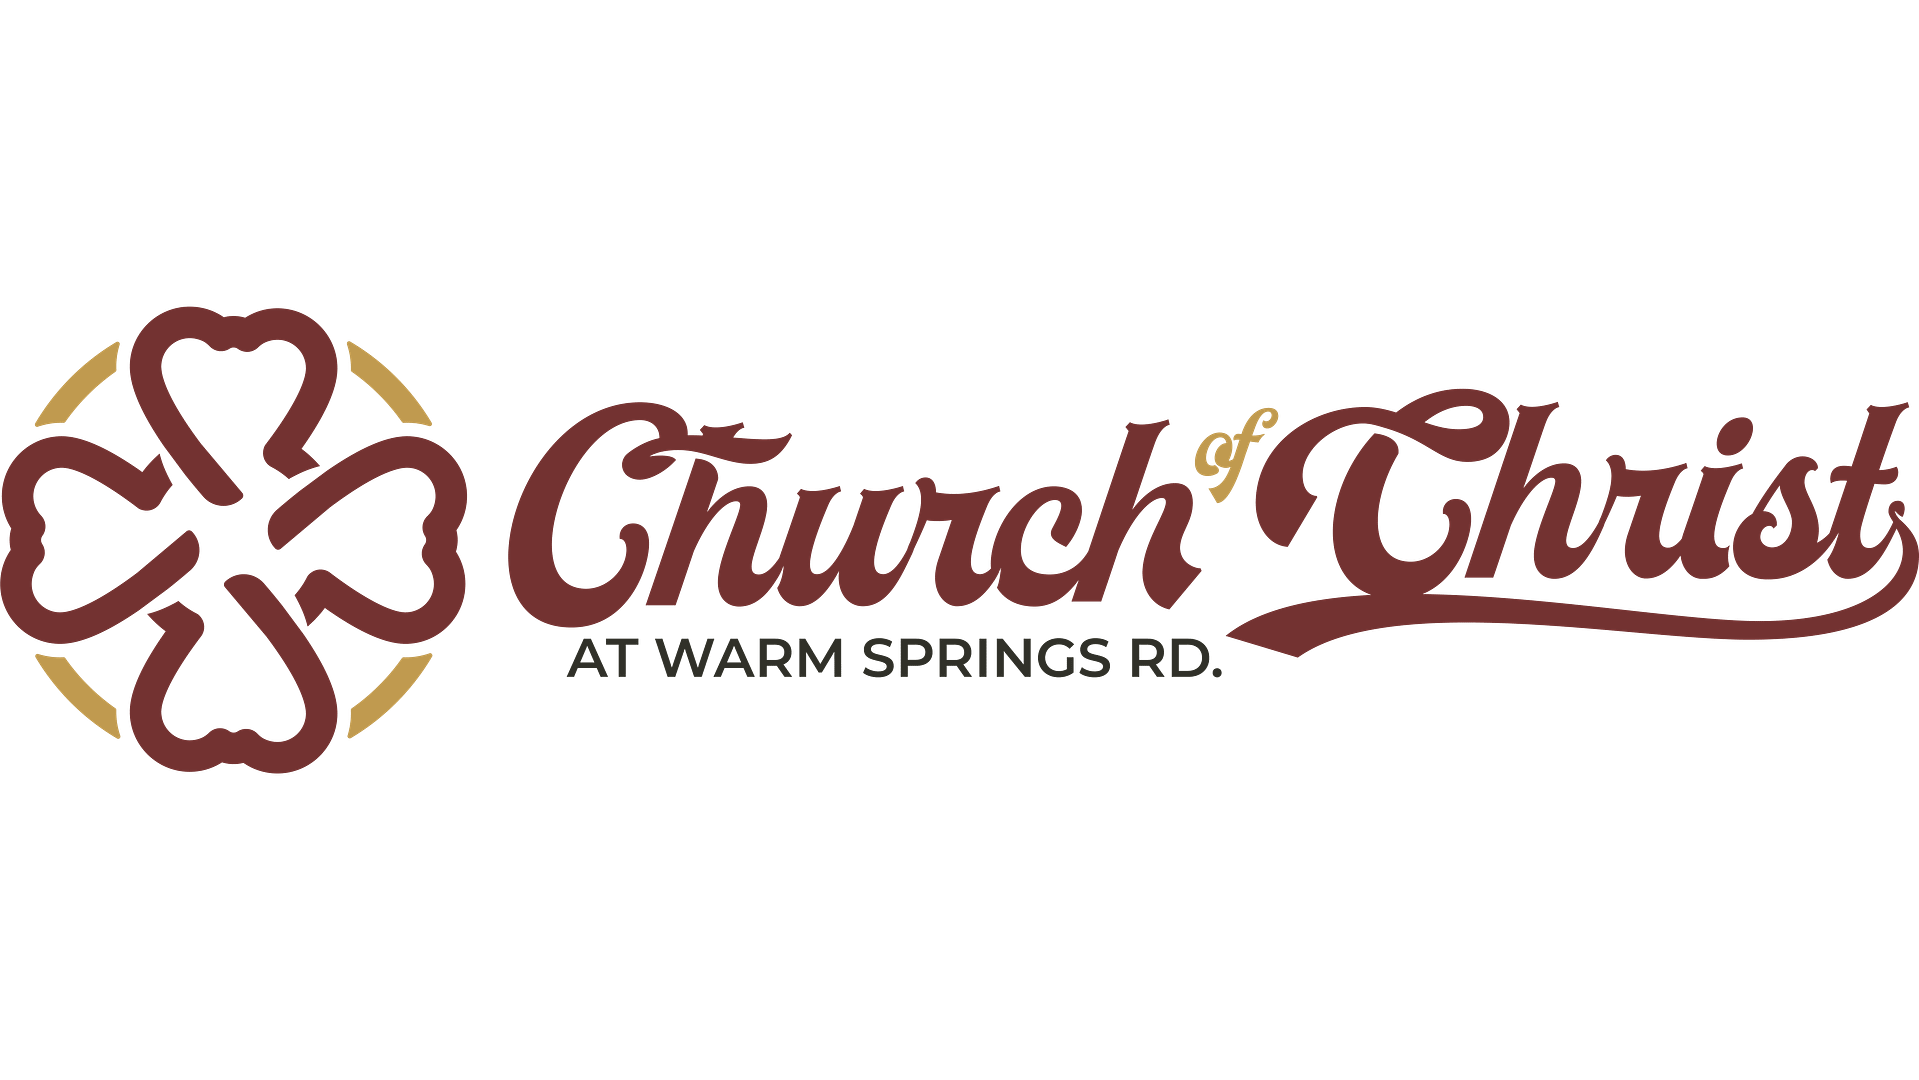 Church of Christ at Warm Springs Road